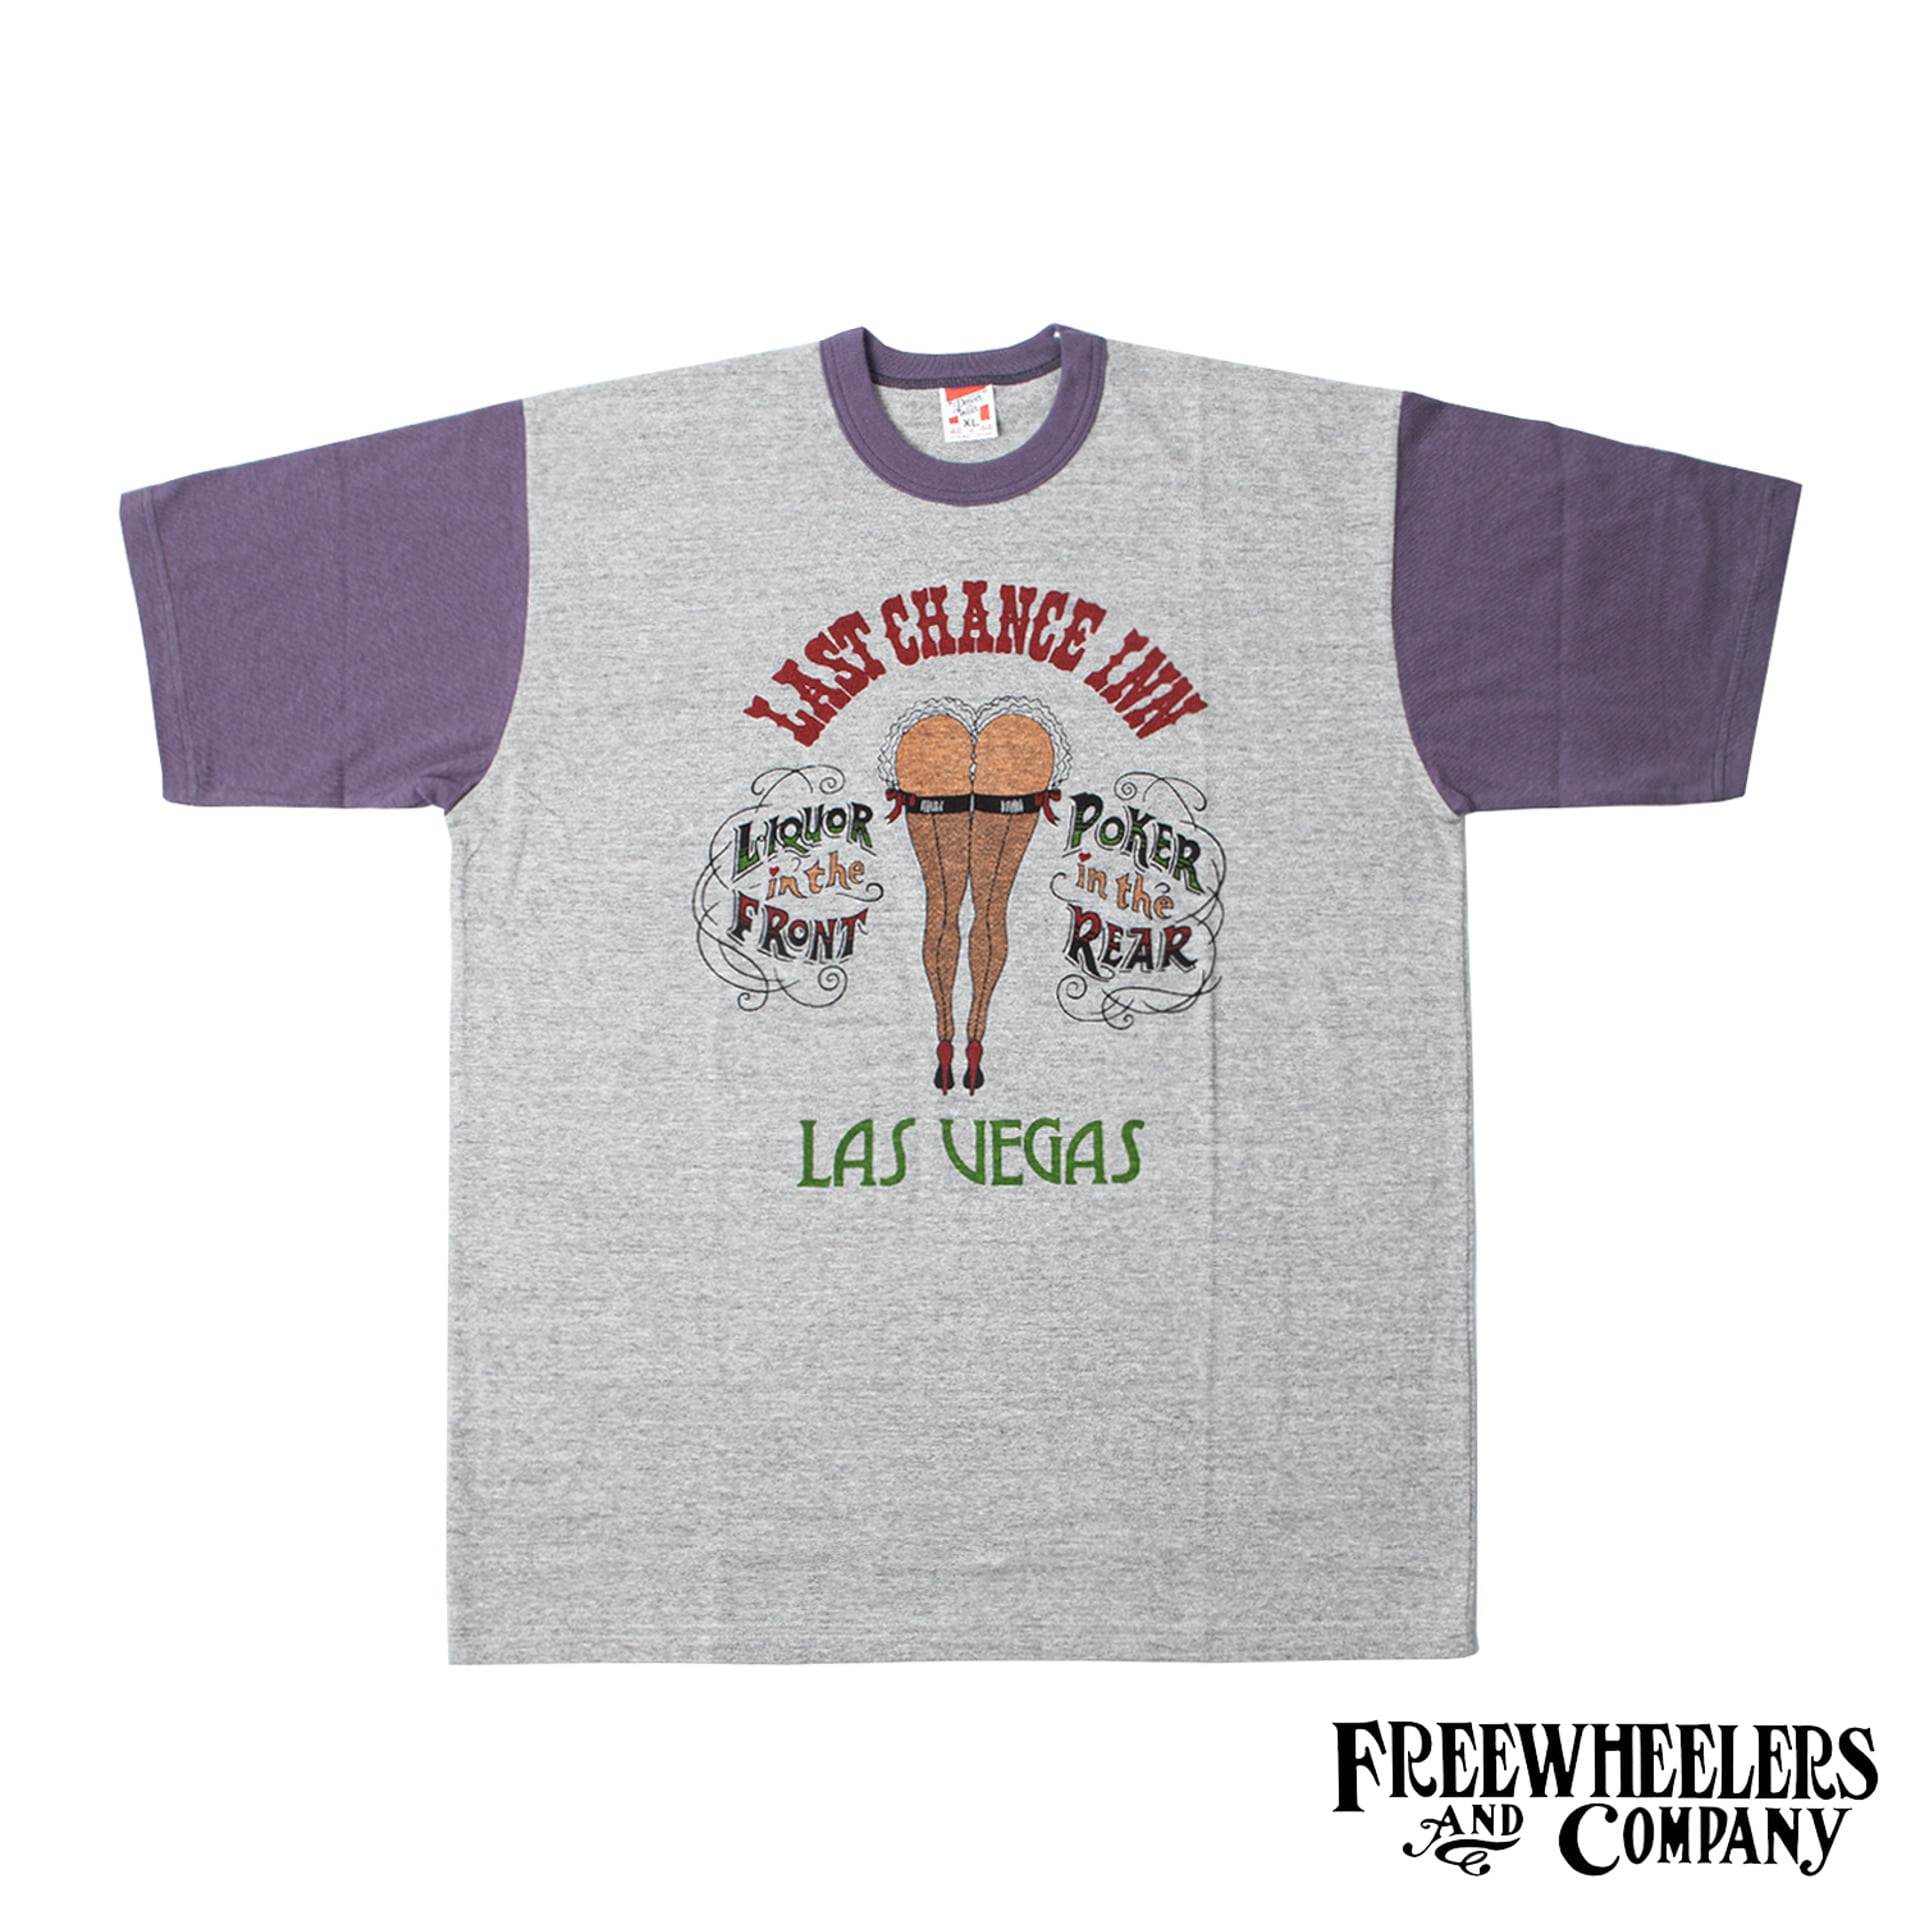 [POWER WEAR]VINTAGE STYLE LIGHT WEIGHT JERSEYHOME of U.S. SERIES  LAS VEGAS “GAMBLER” (Mix Gray X Wasted Navy)